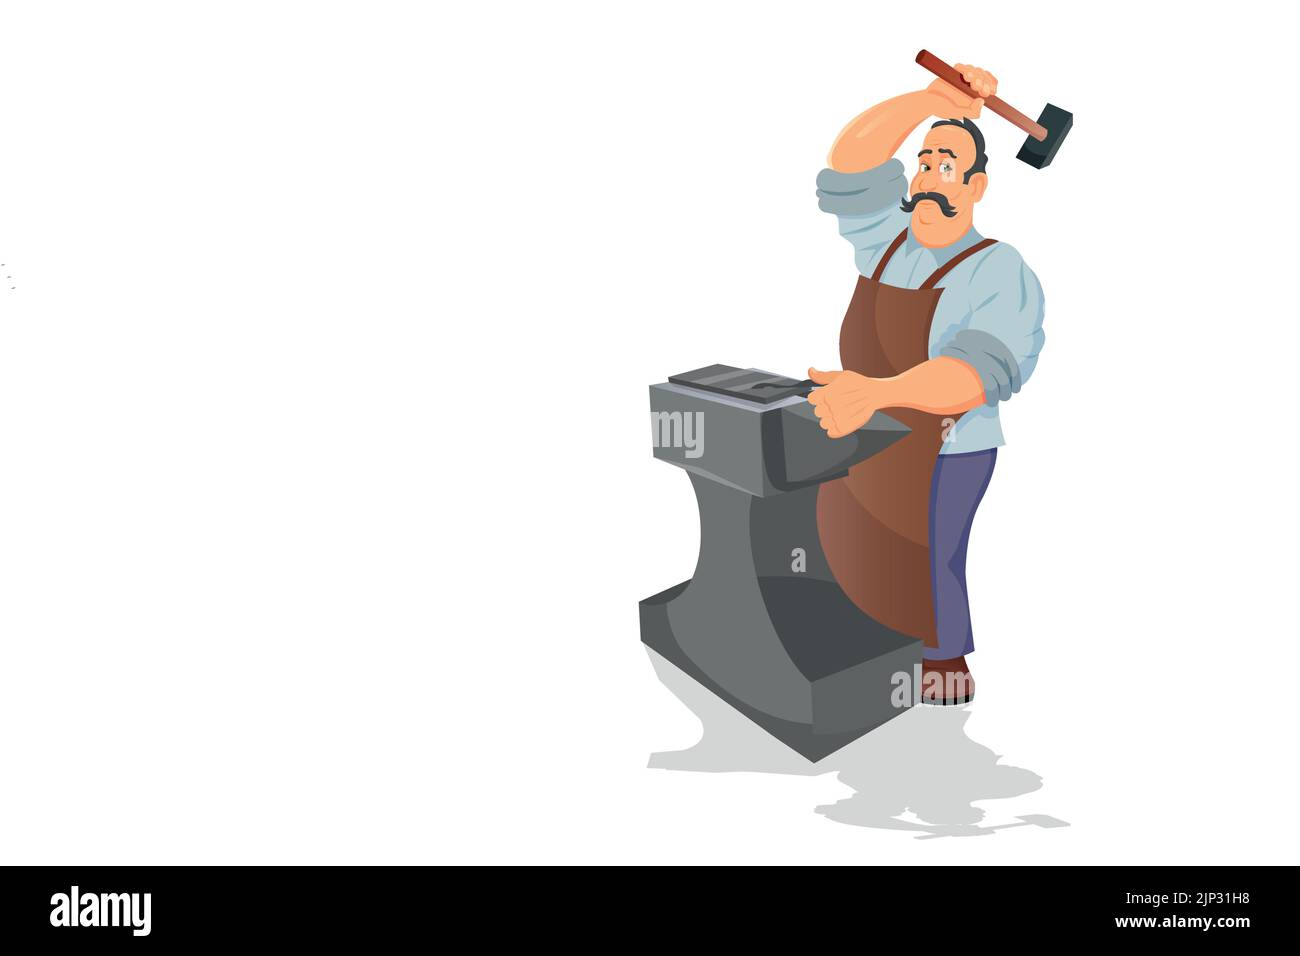 Medieval blacksmith vector illustration. Smith working with hammer and anvil isolated cartoon character Stock Vector